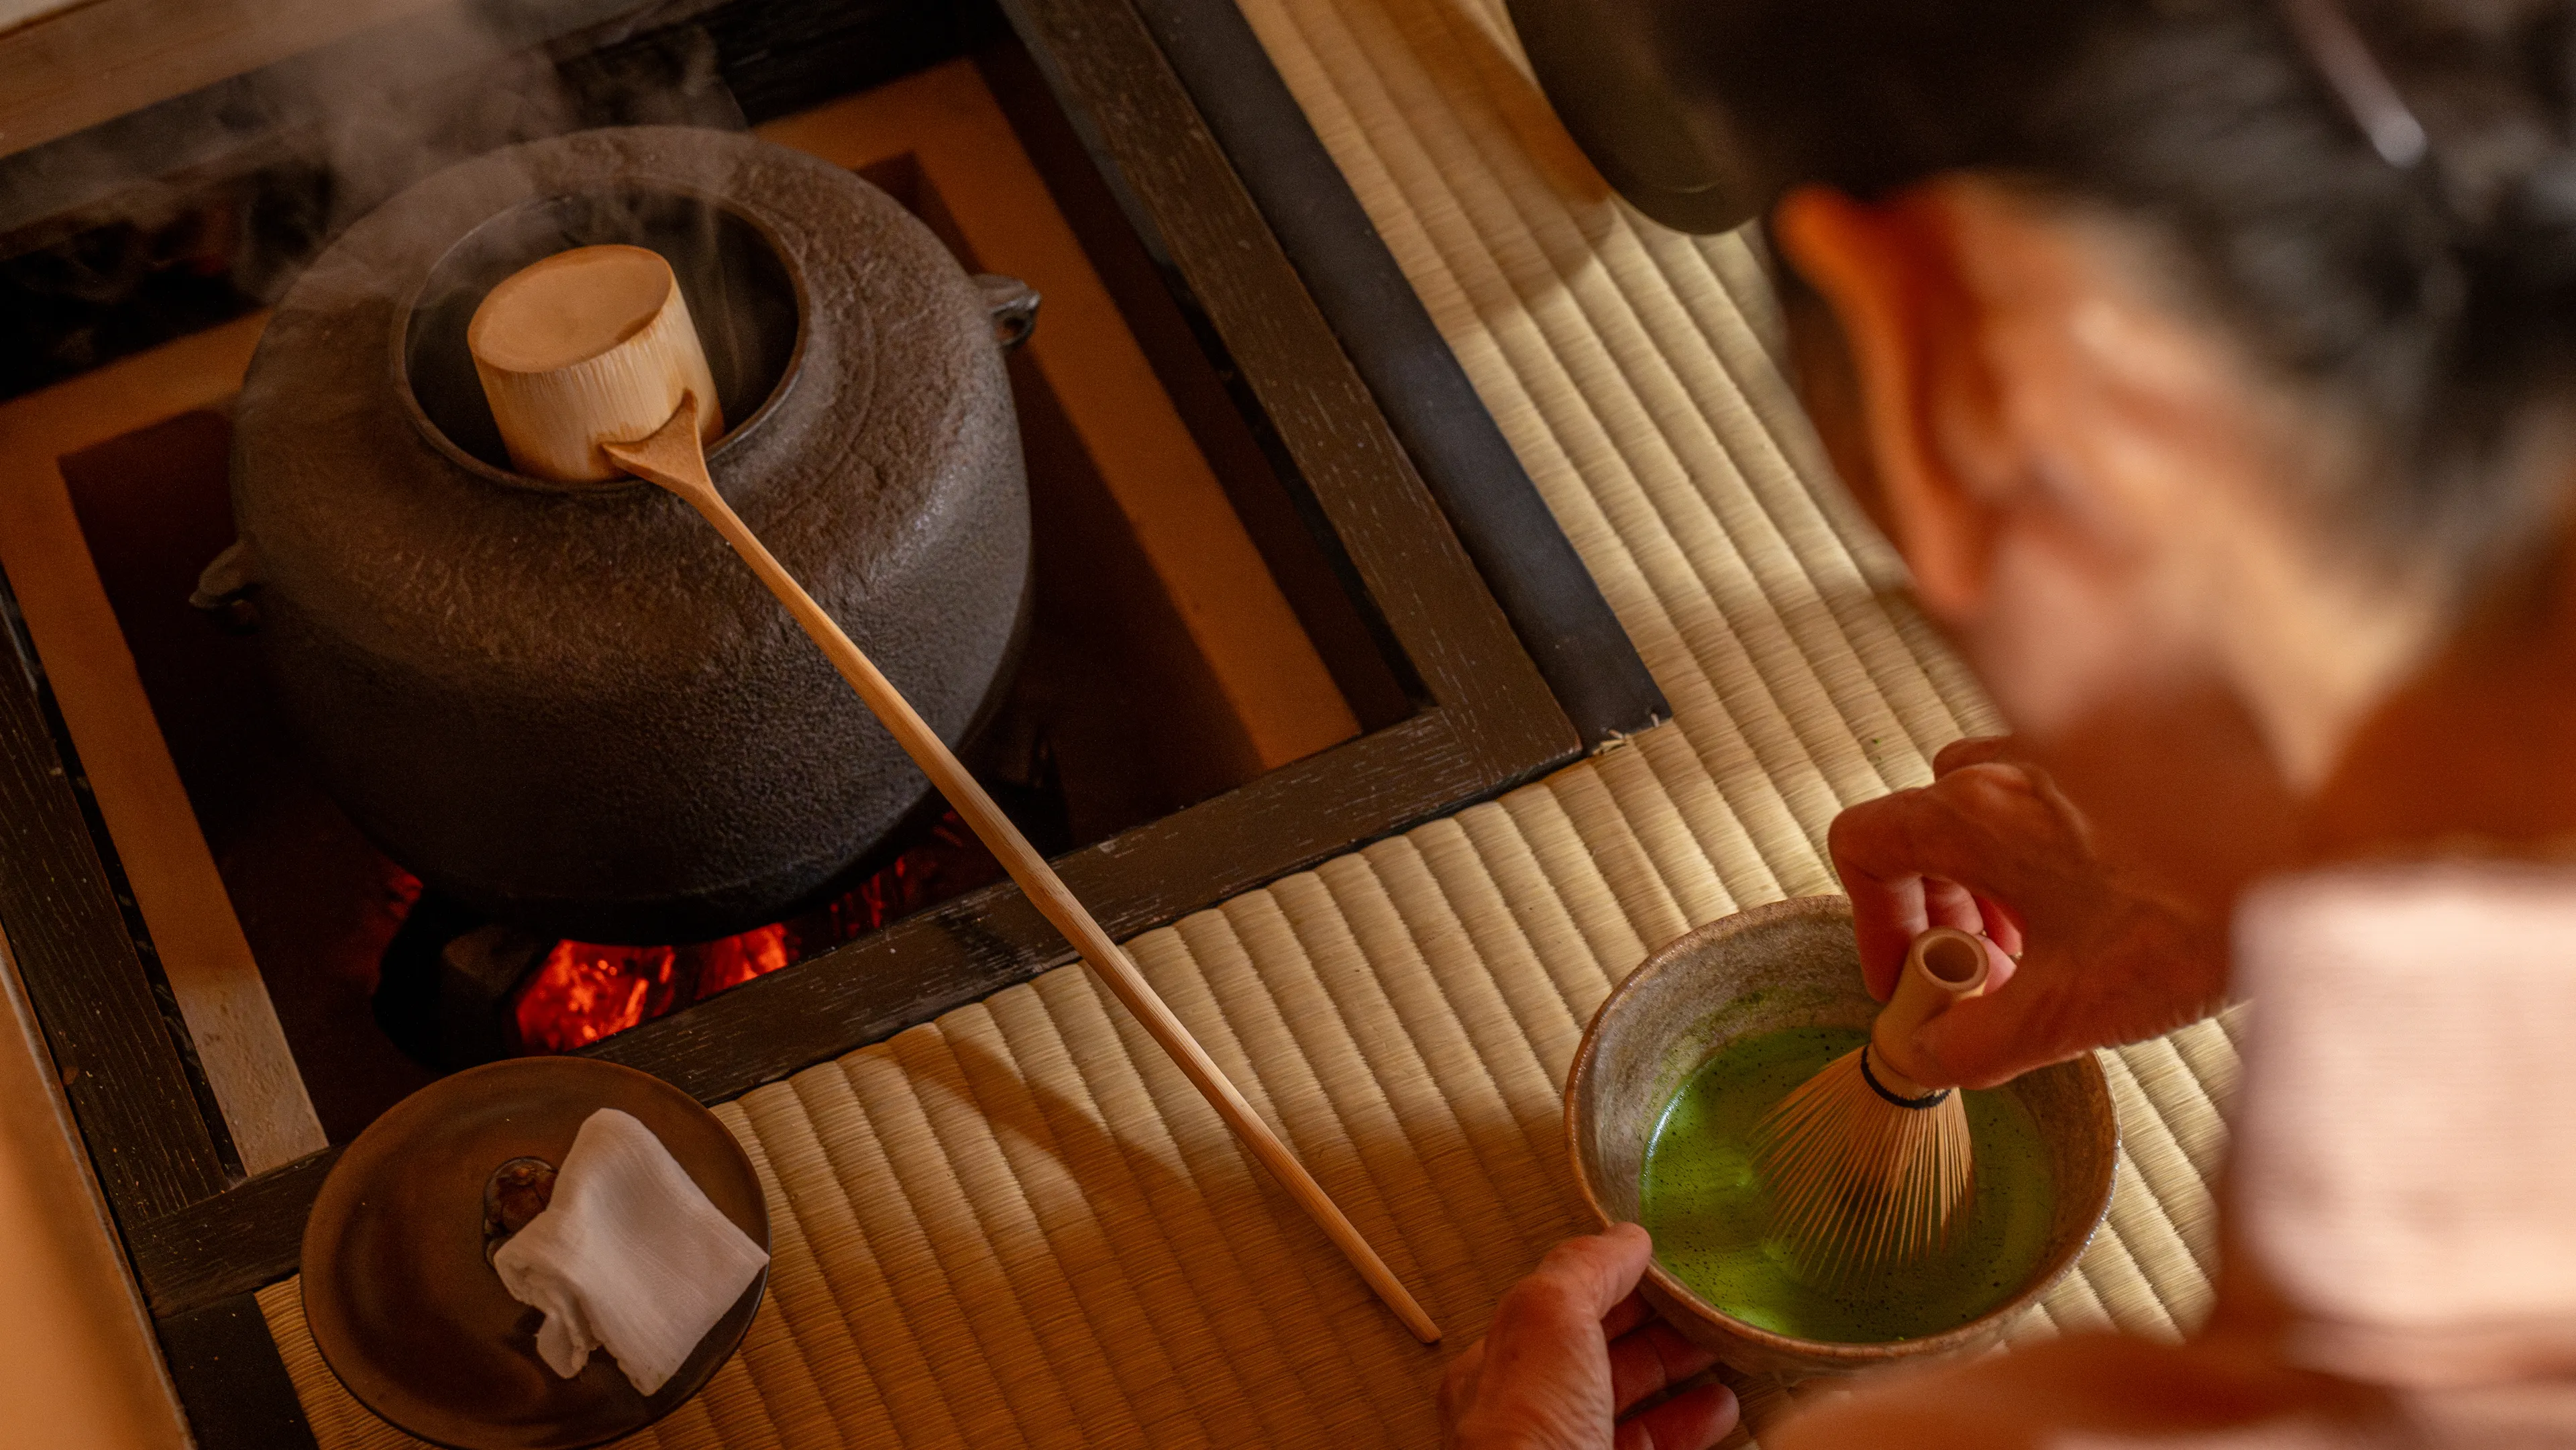 Experience the Essence of Japanese Spirit through the Tea Ceremony, the Heart of Japanese Hospitality